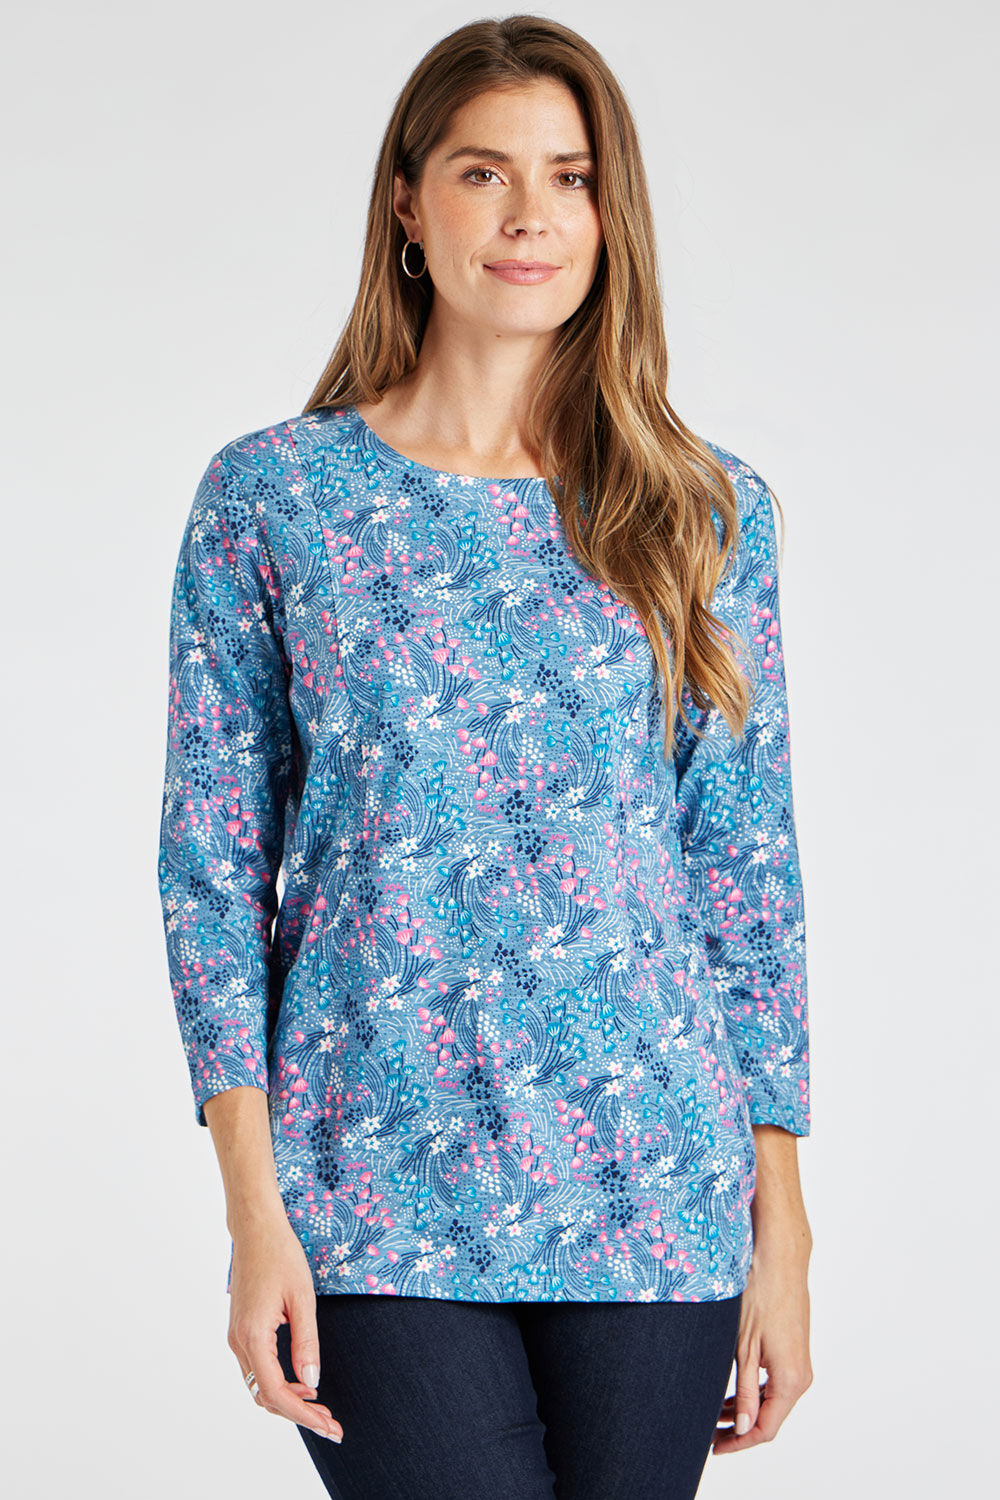 Bonmarche Blue 3/4 Sleeve Swirl Print Tunic With Pockets, Size: 12